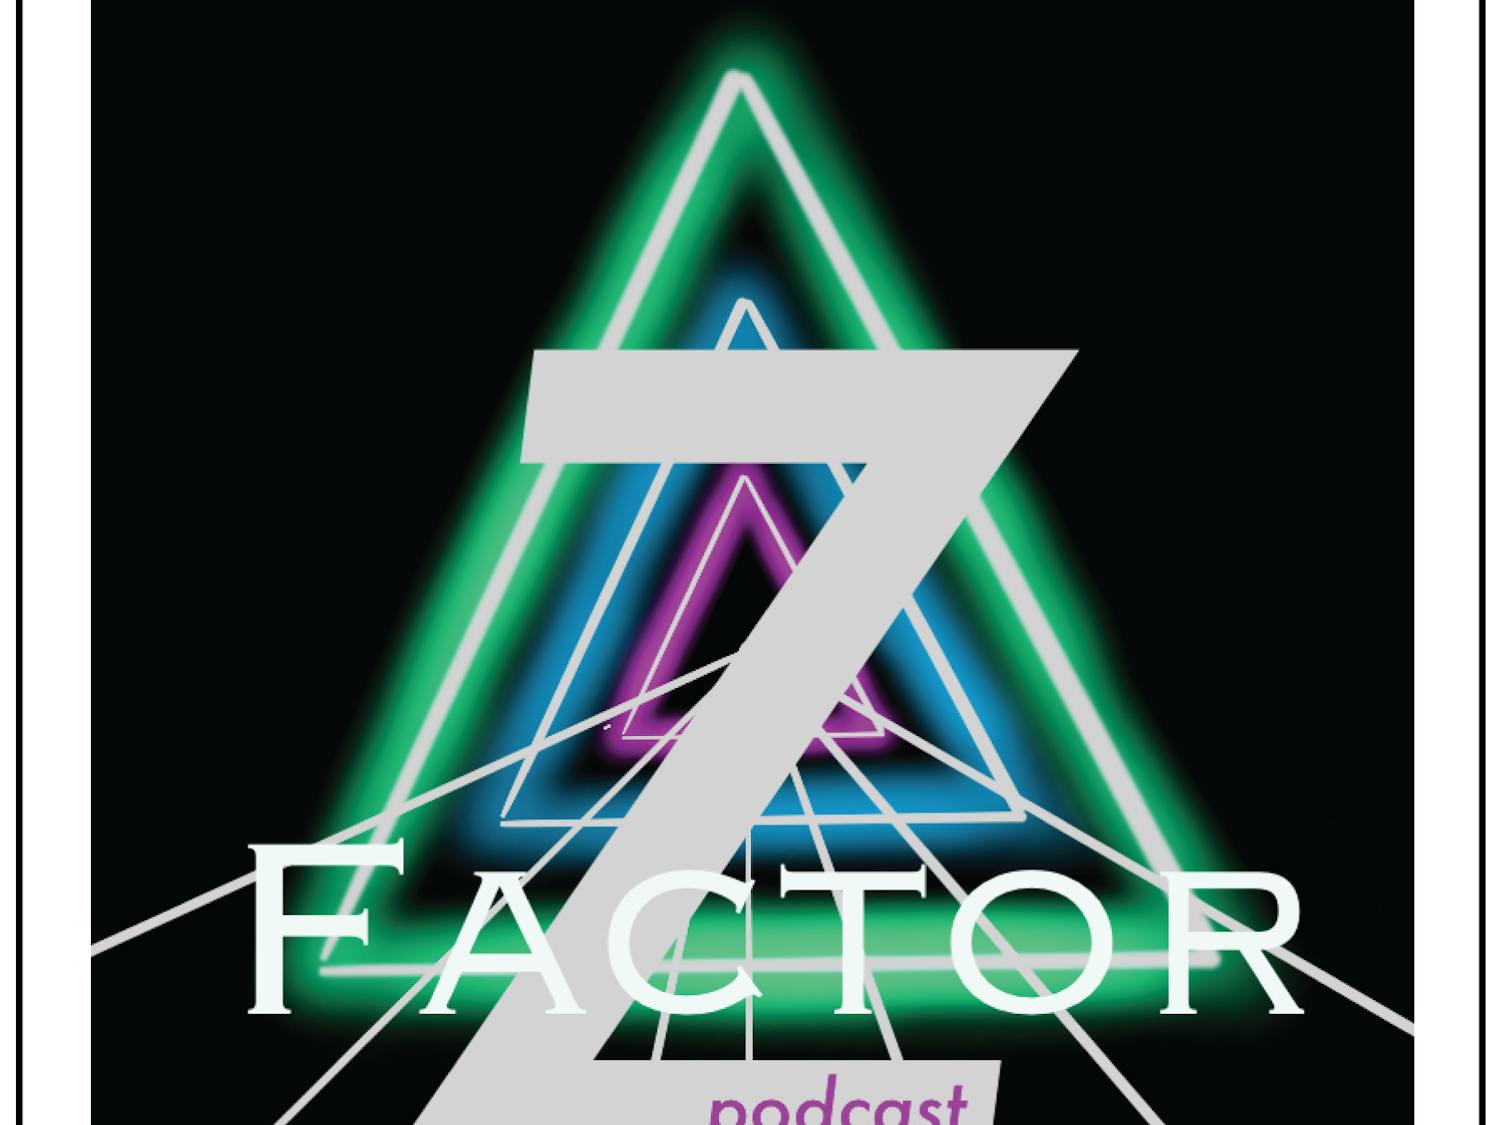 zfactorpodcastcover-01.png